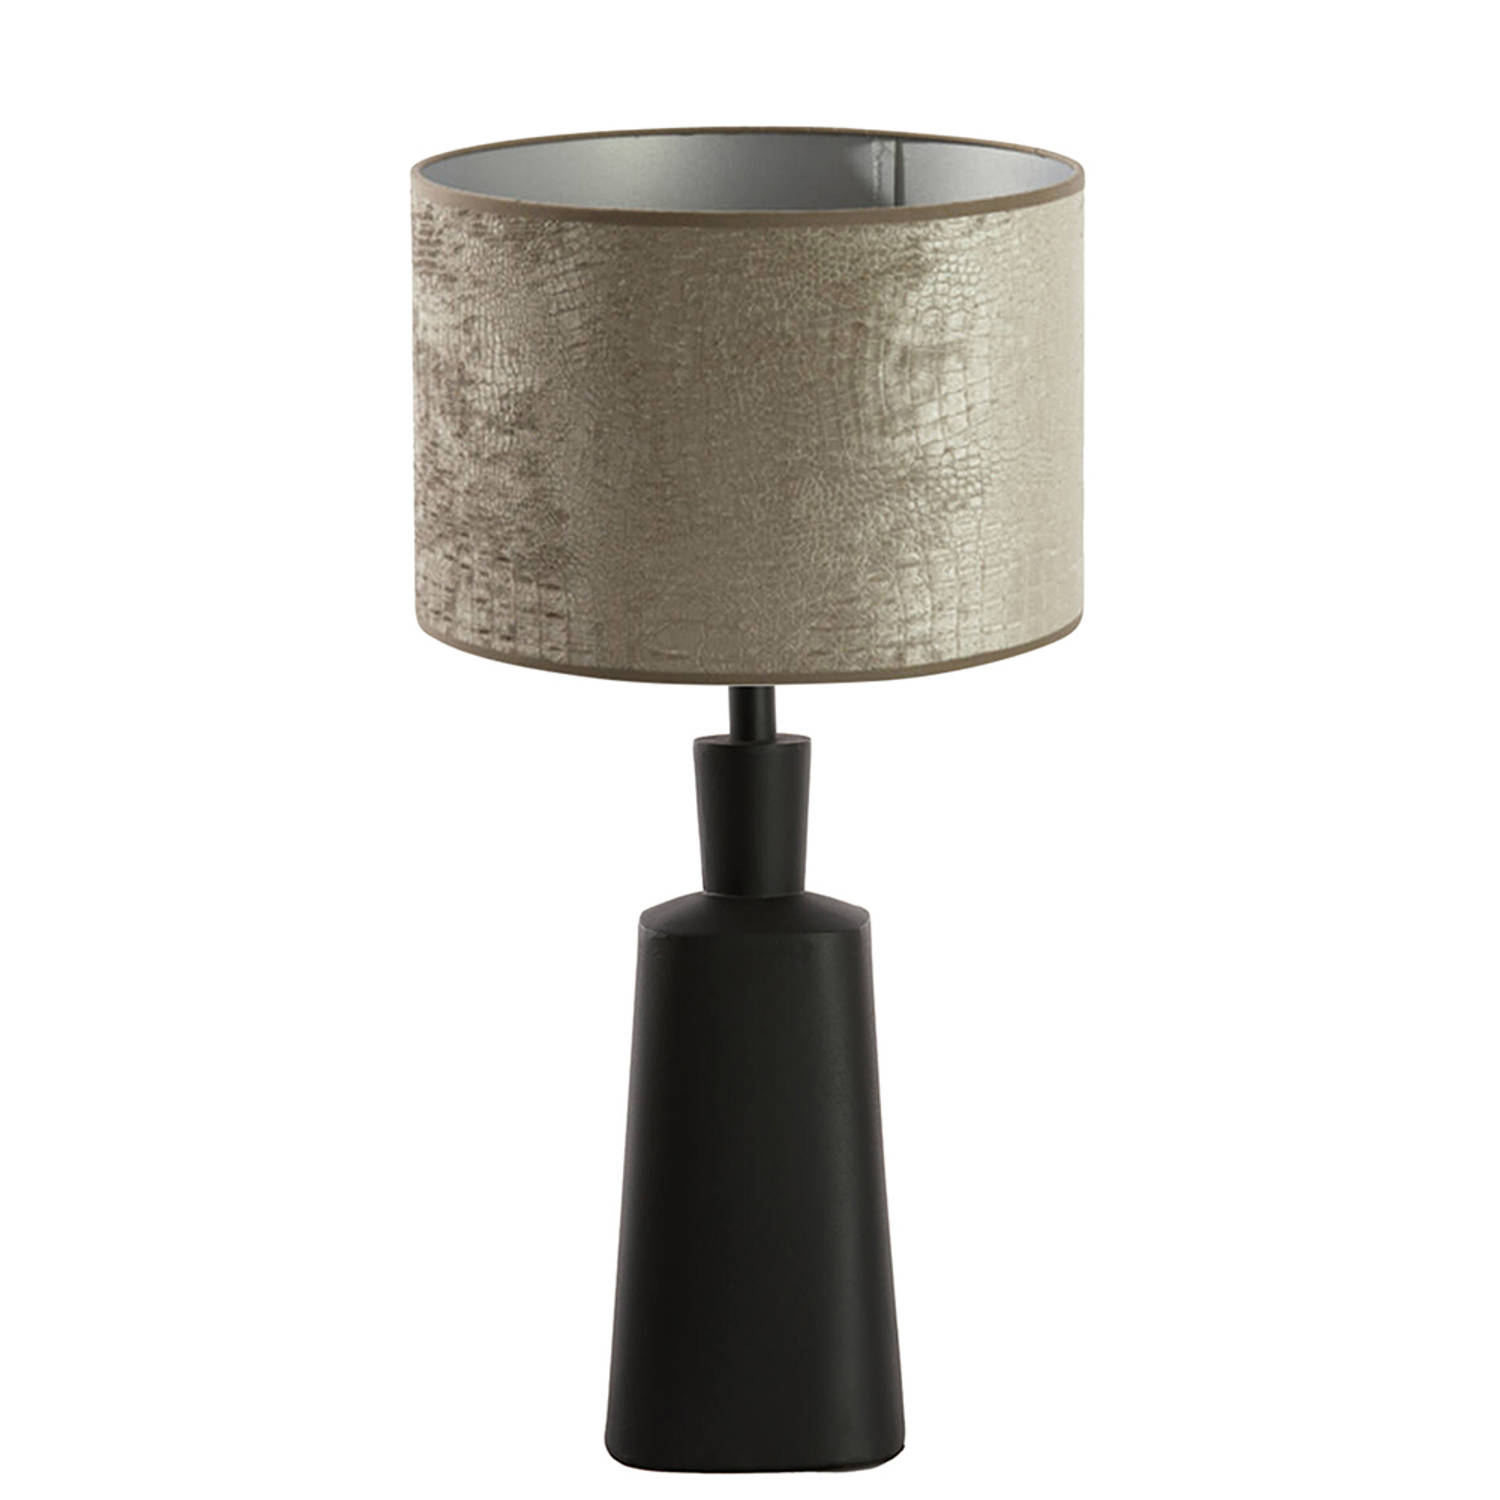 Light and Living Donah tafellamp - Ø 30 cm - E27 (grote fitting) - zilver